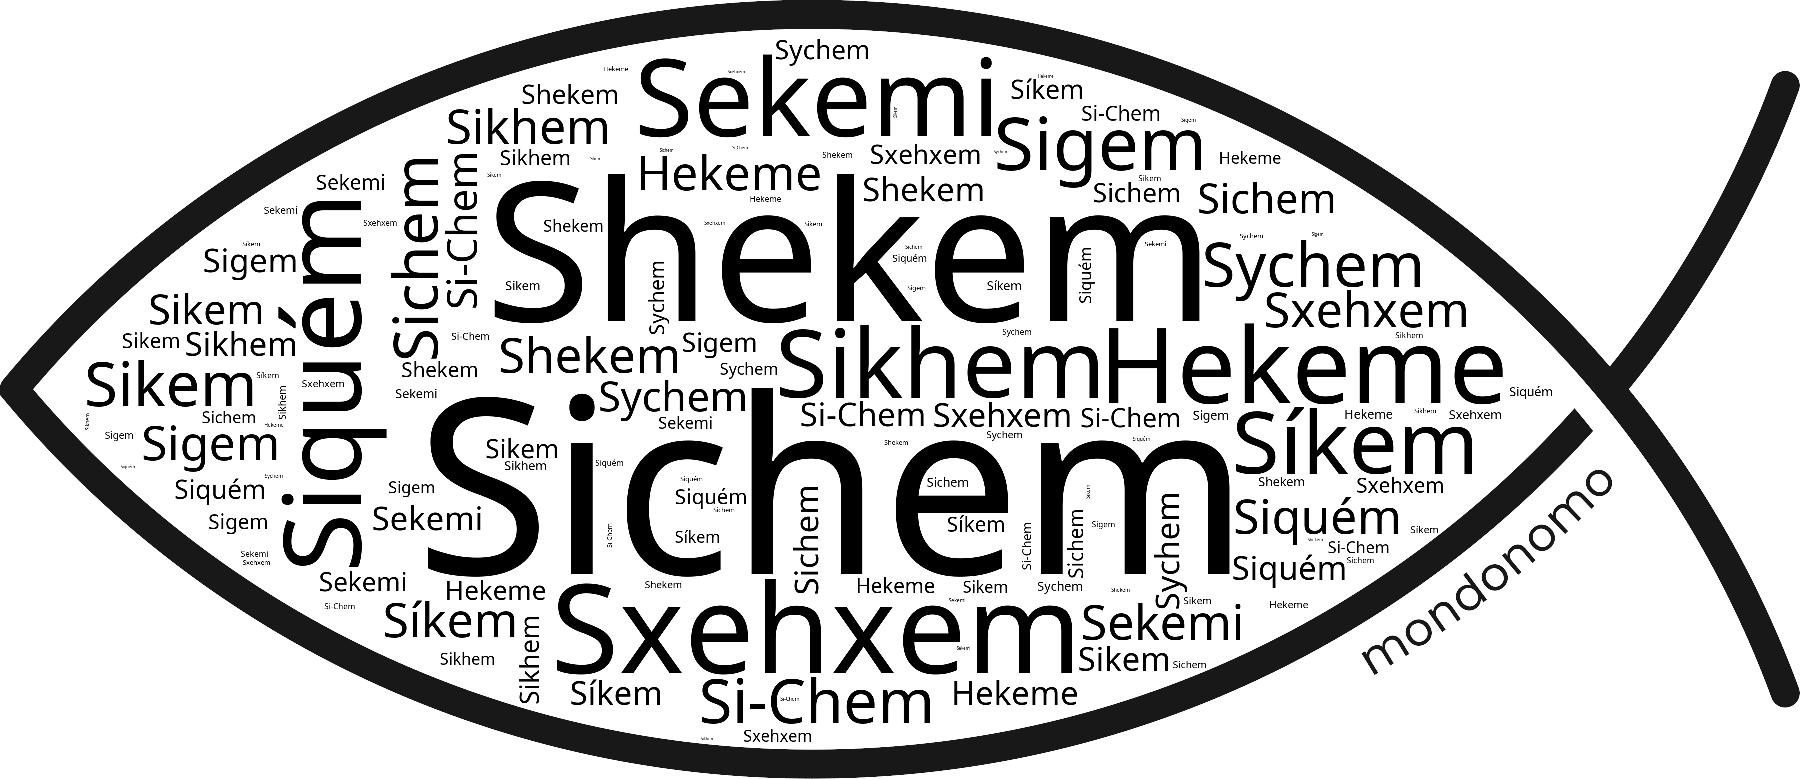 Name Sichem in the world's Bibles